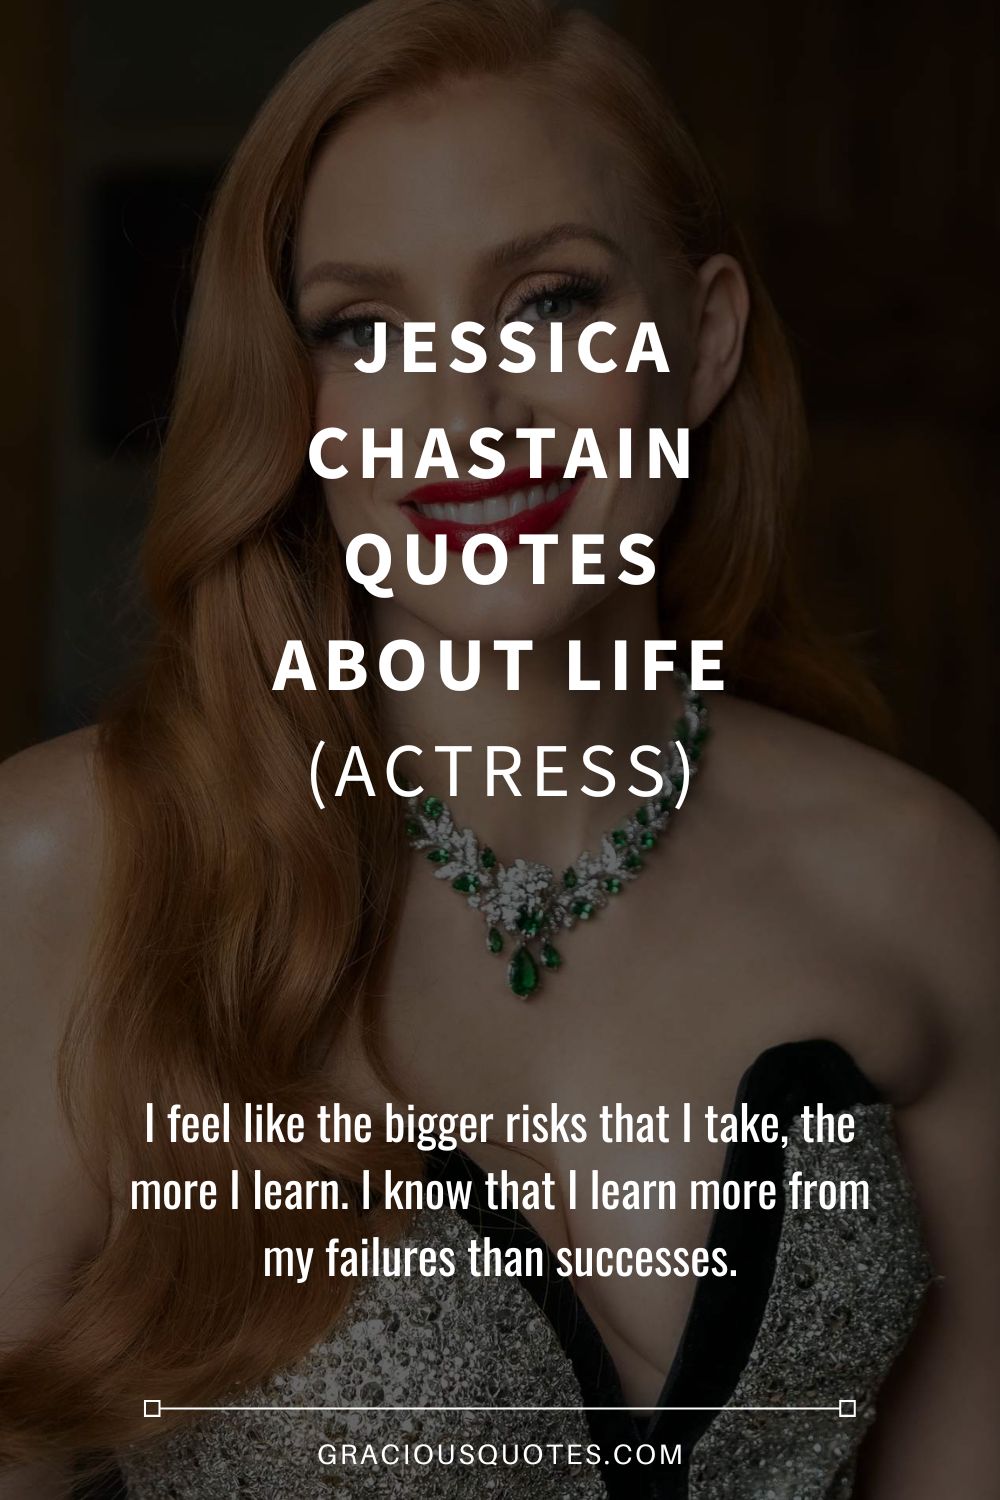 Jessica Chastain Quotes About Life (ACTRESS) - Gracious Quotes